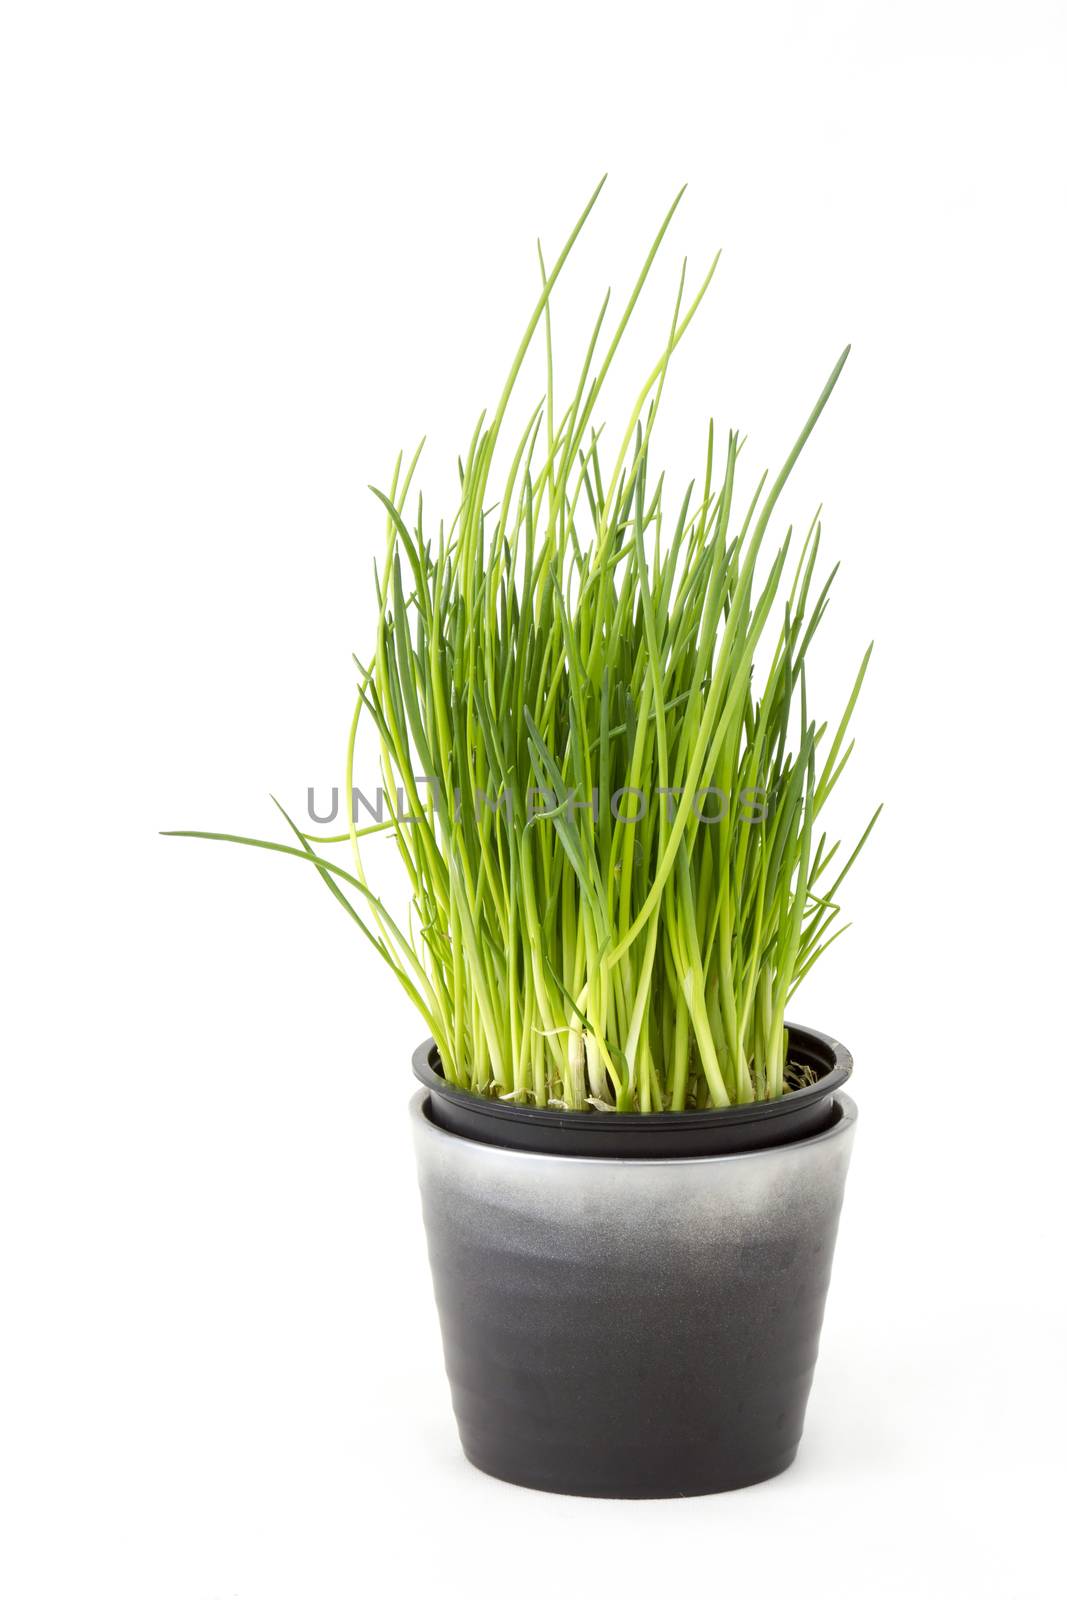 fresh chives in a pot by miradrozdowski